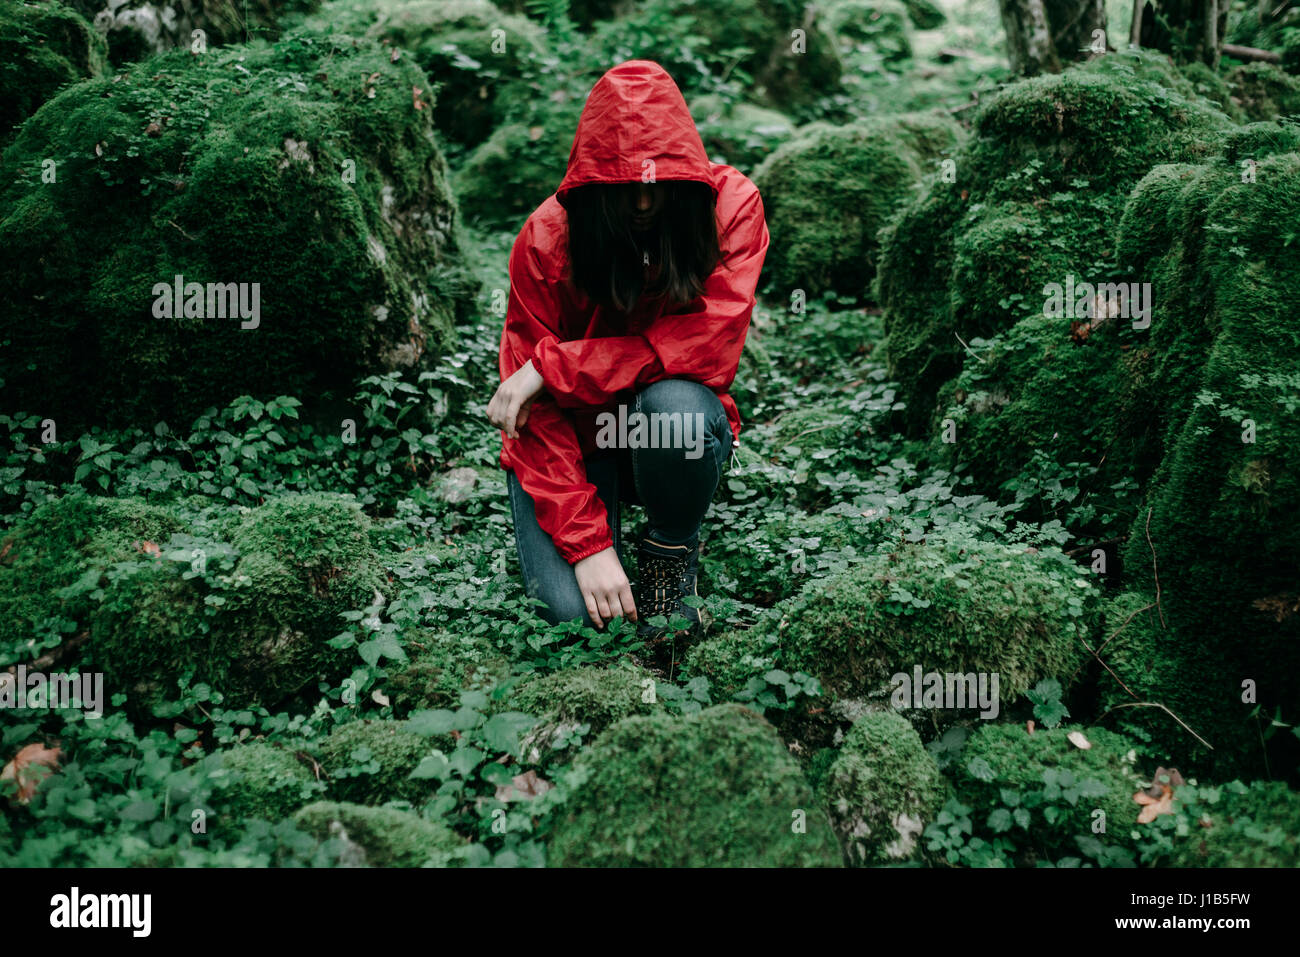 Caucasian woman kneeling in lush forest Stock Photo